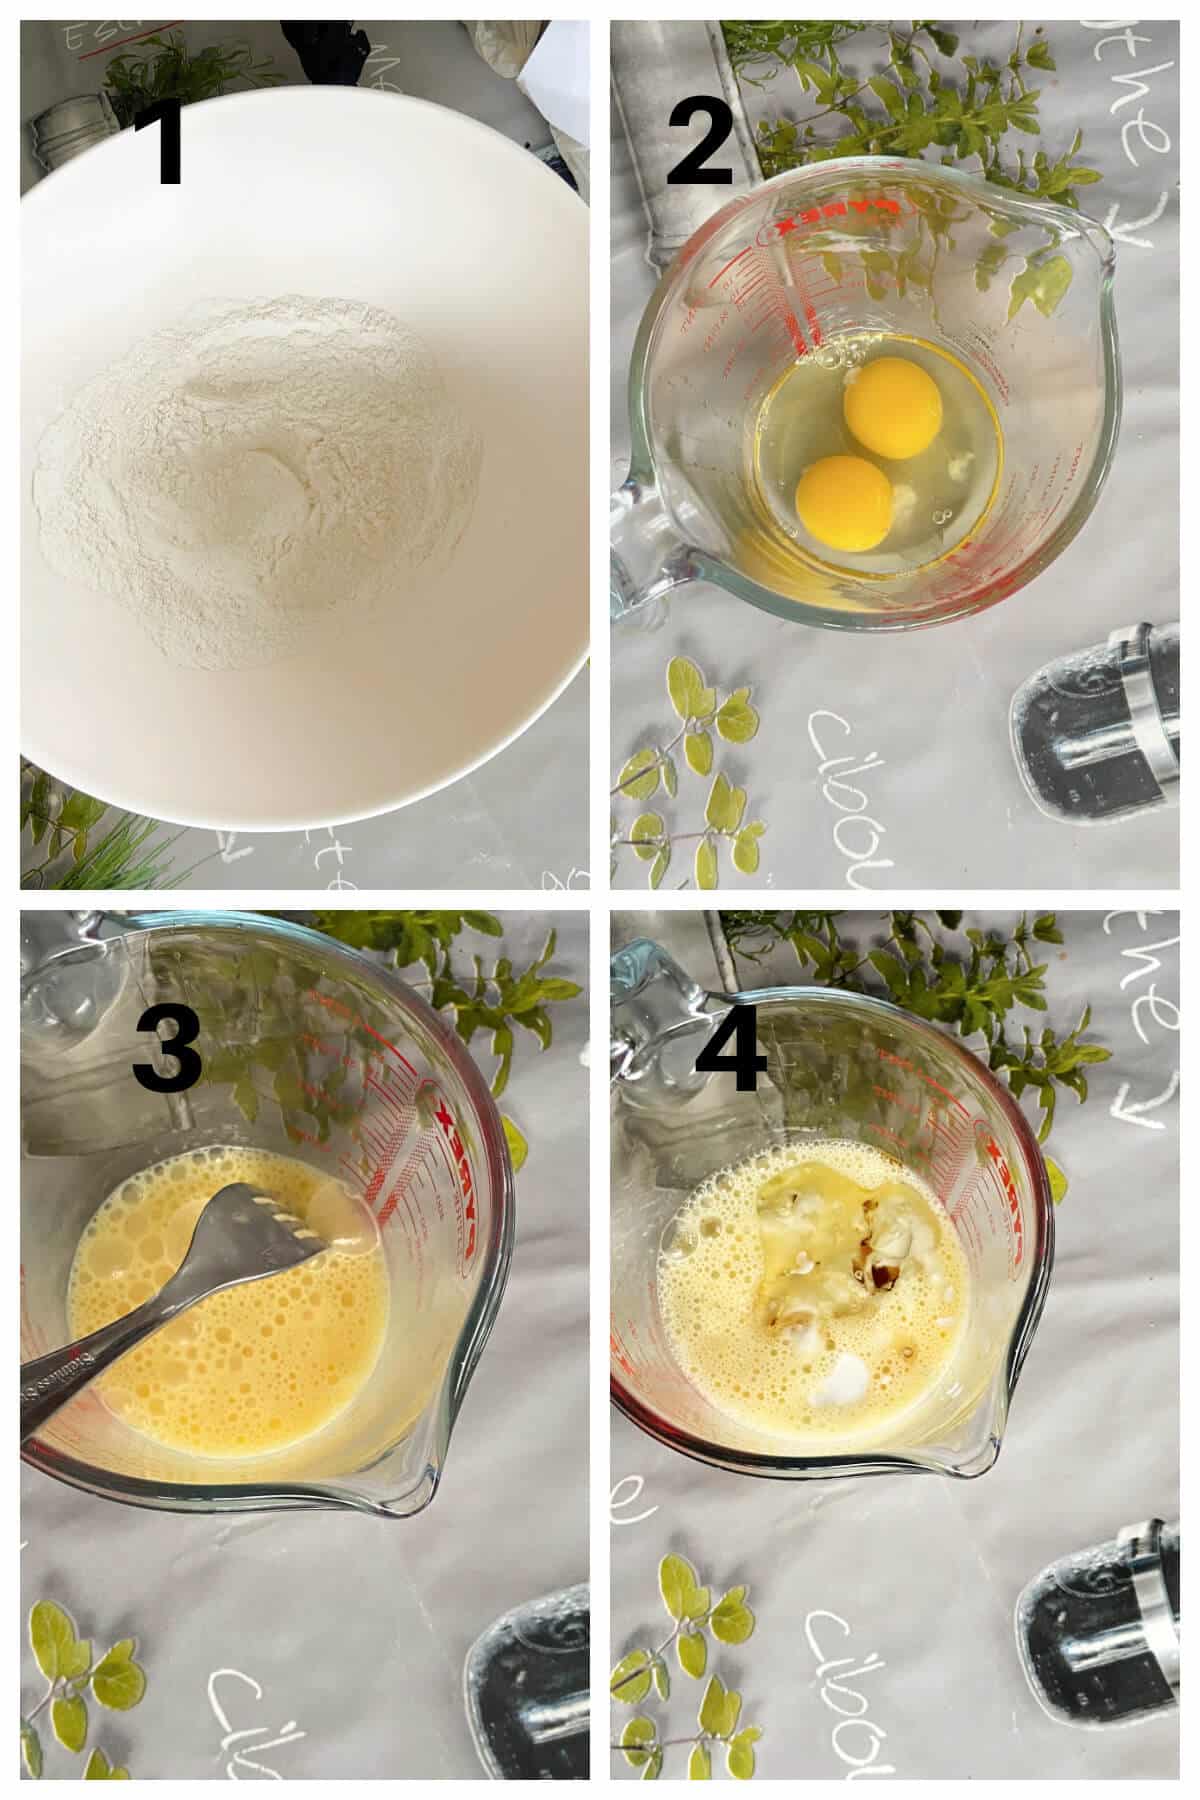 Collage of 4 photos to show how to make plantain bread.